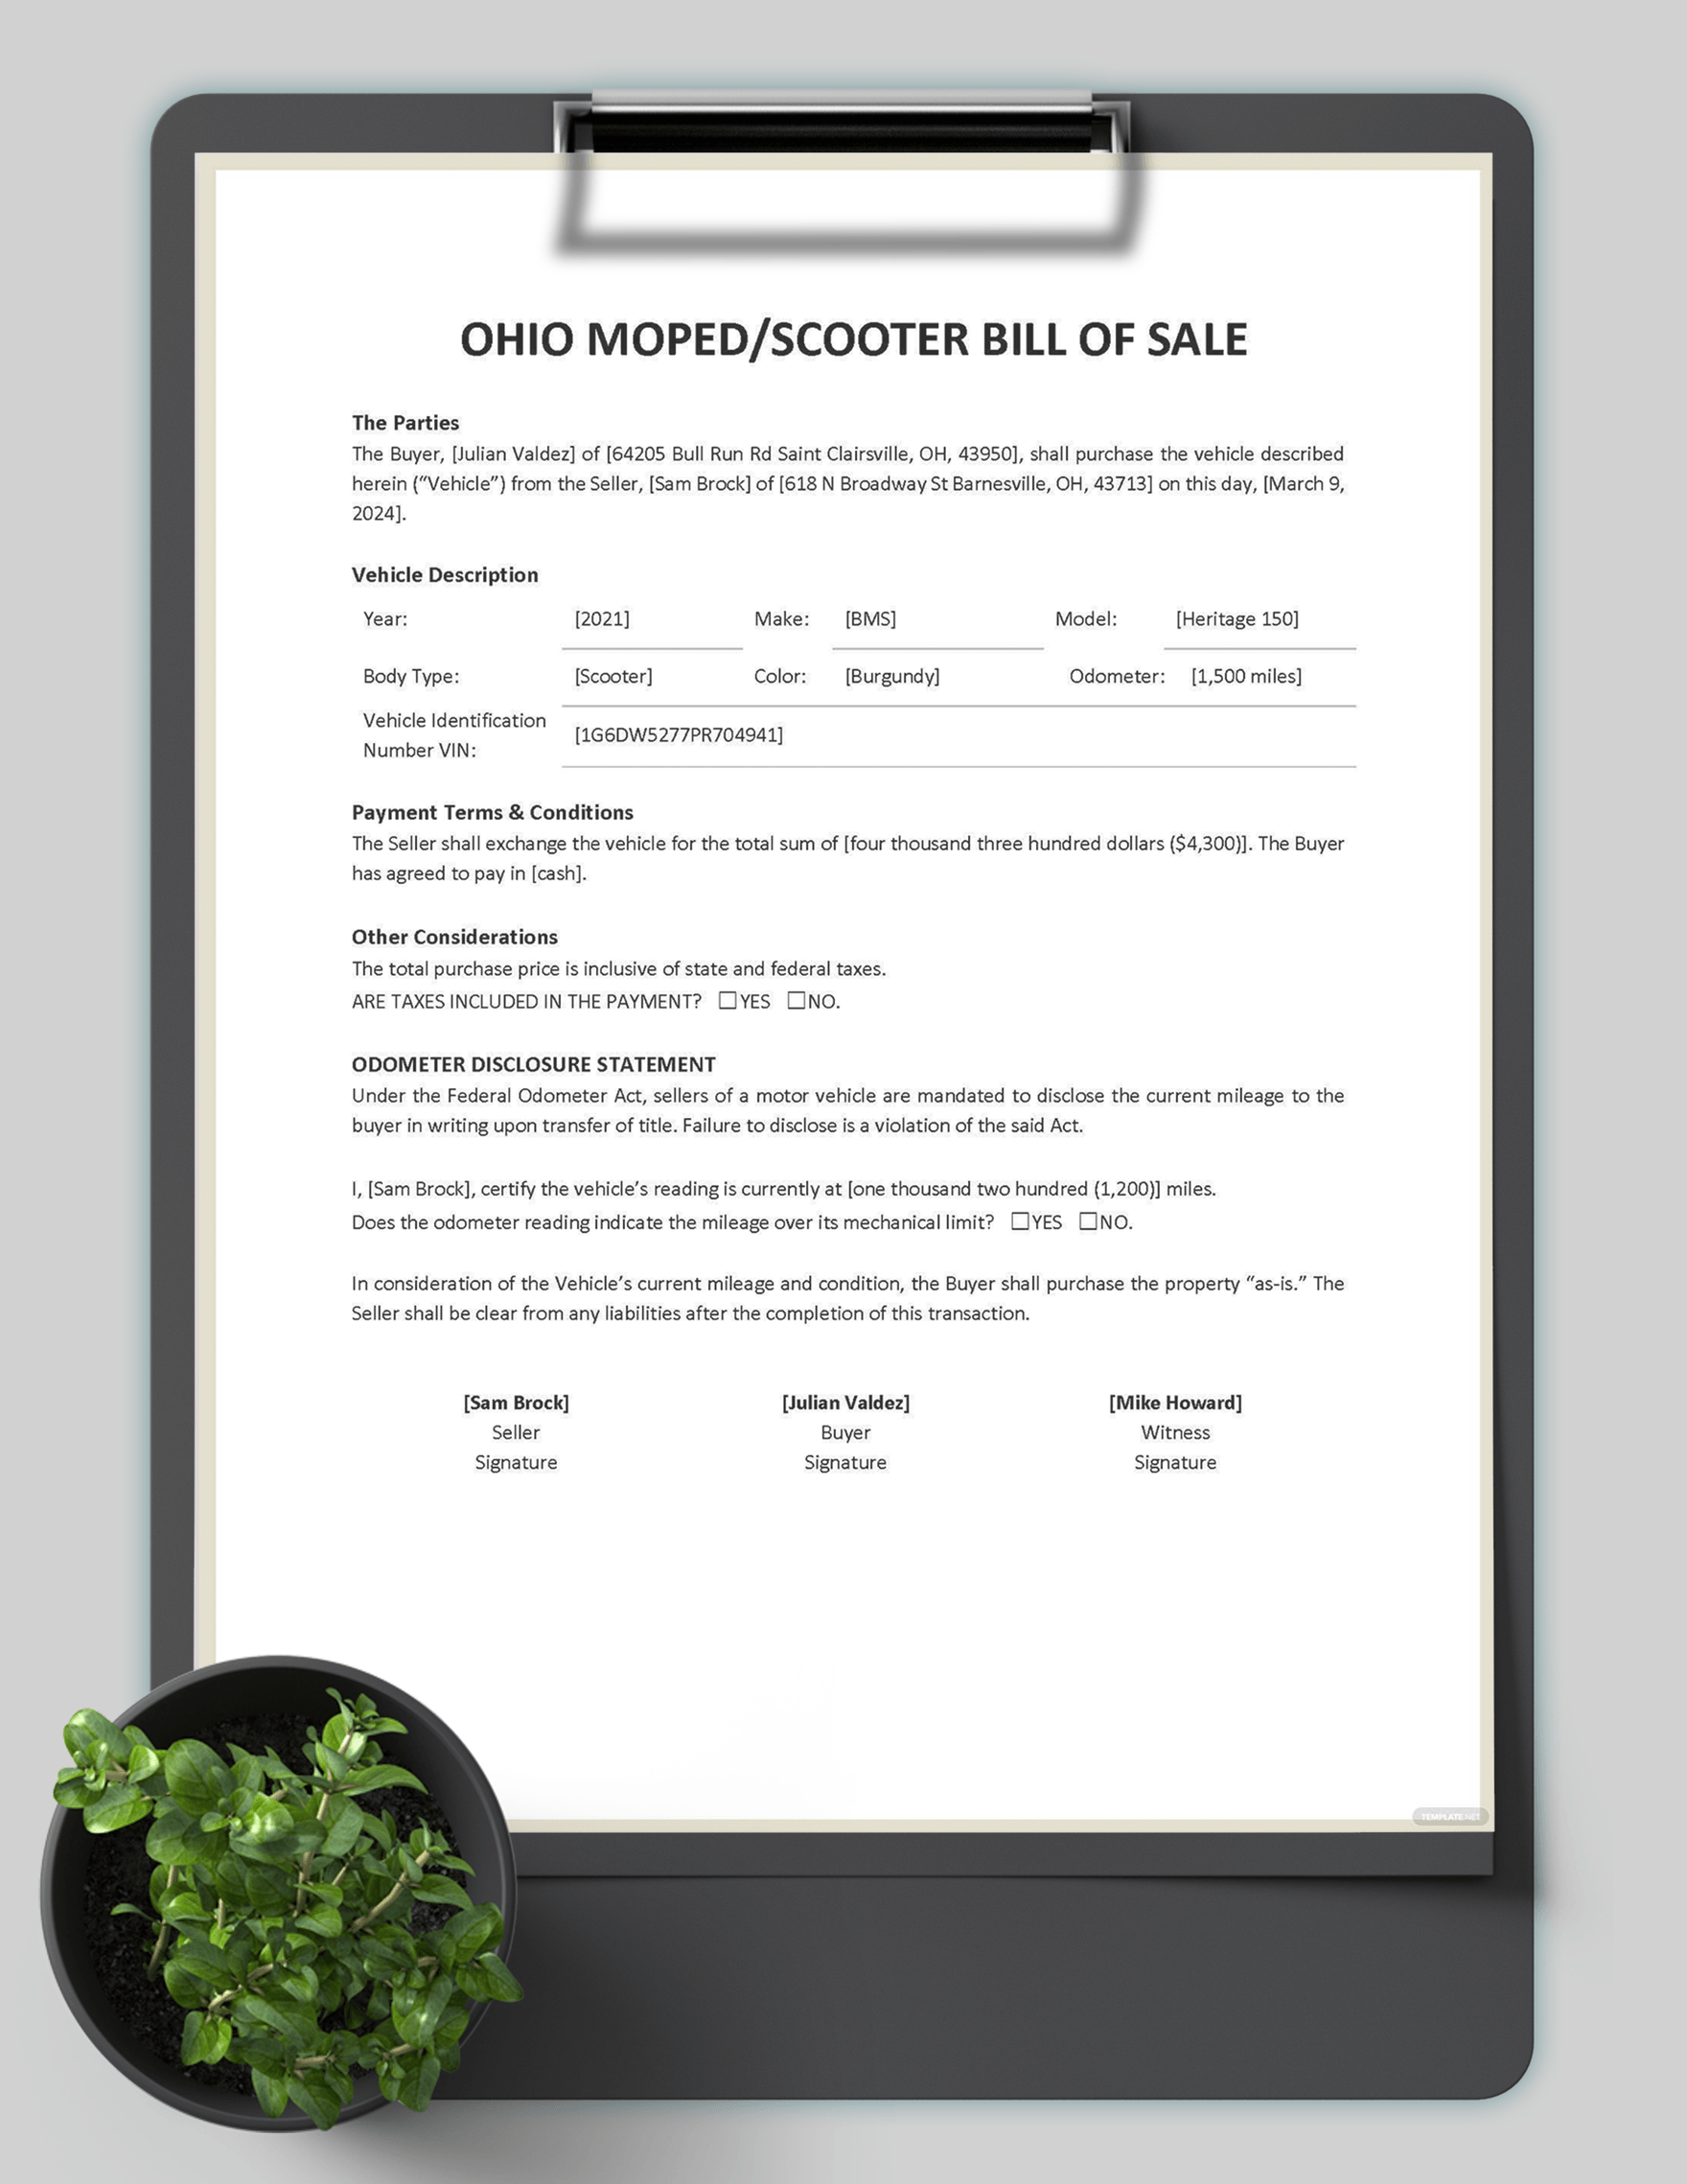 Ohio Moped / Scooter Bill of Sale Template